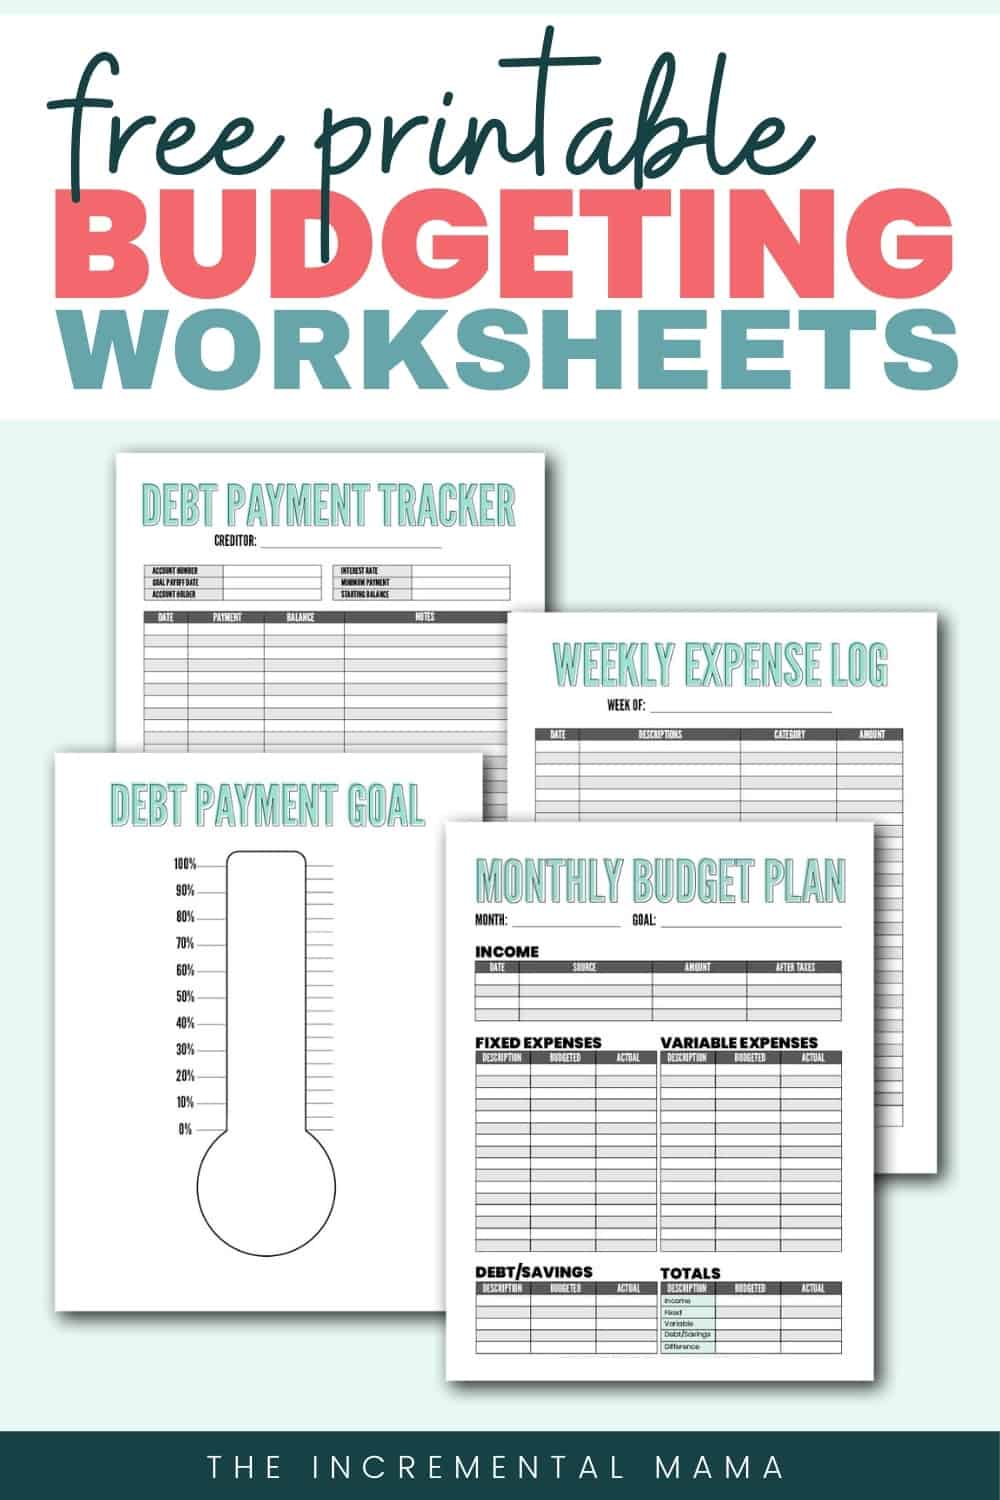 free-blank-budget-worksheet-printables-to-take-charge-of-your-finances